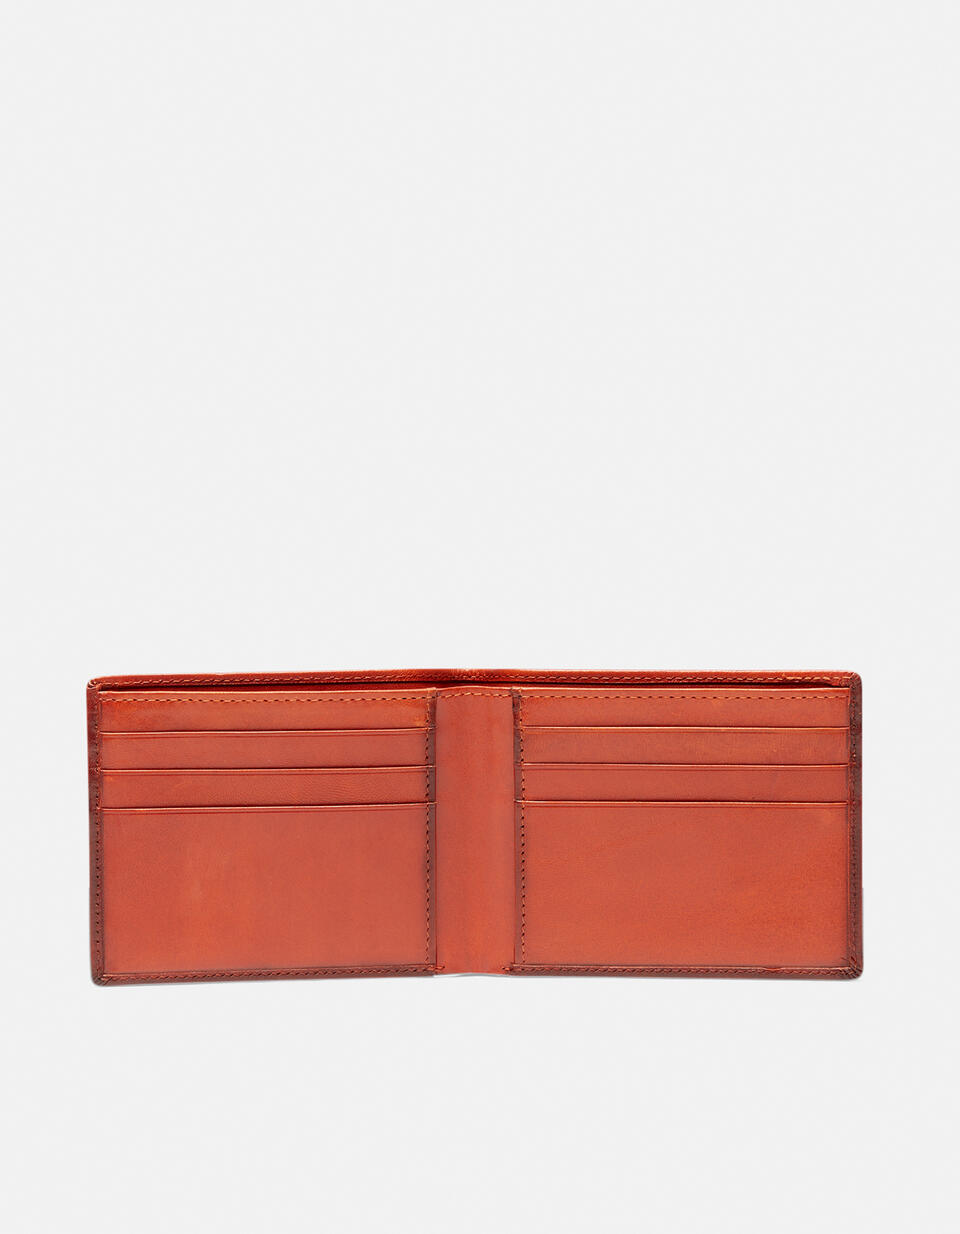 Leather Warm and Color Anti-RFid Wallet - Women's Wallets - Men's Wallets | Wallets ARANCIO - Women's Wallets - Men's Wallets | WalletsCuoieria Fiorentina